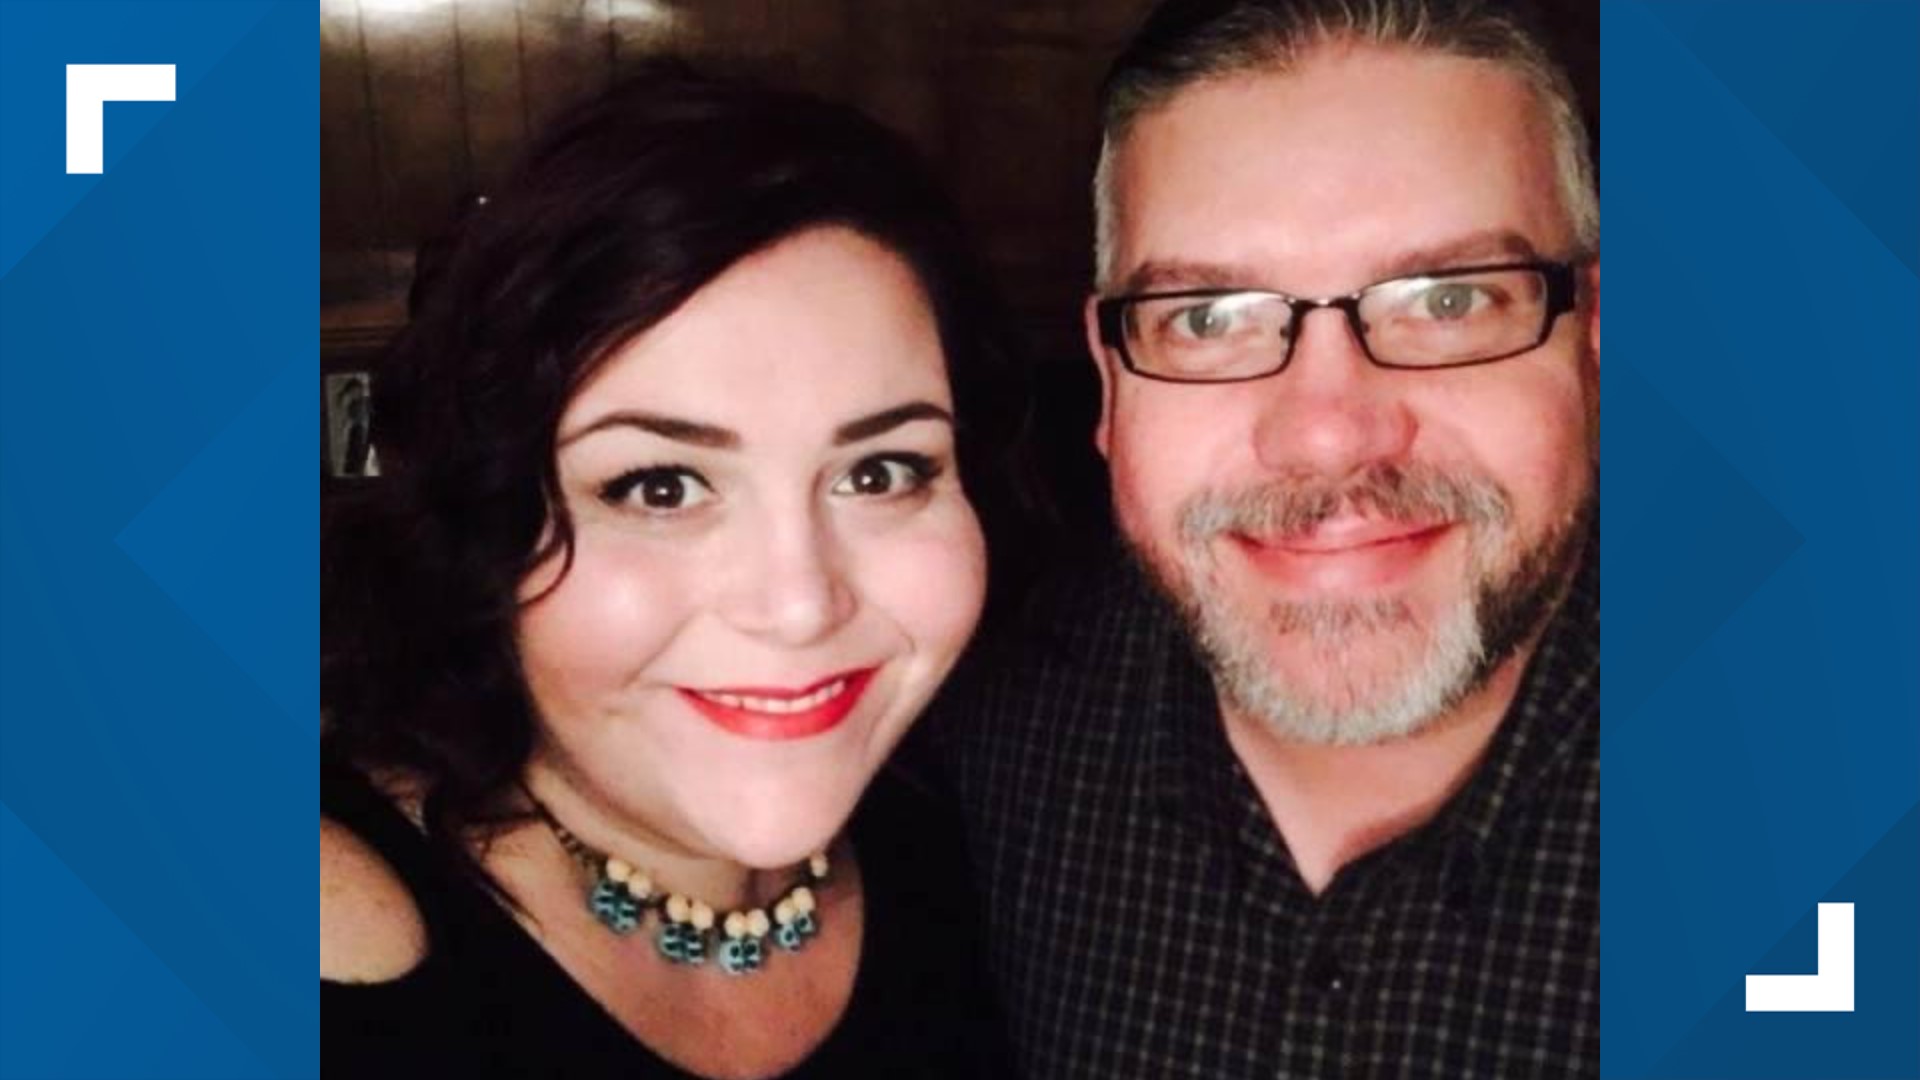 After 21 years of marriage, Kris Houser was forced to look toward a life without his best friend and partner, Brandy Houser. She died from the coronavirus.